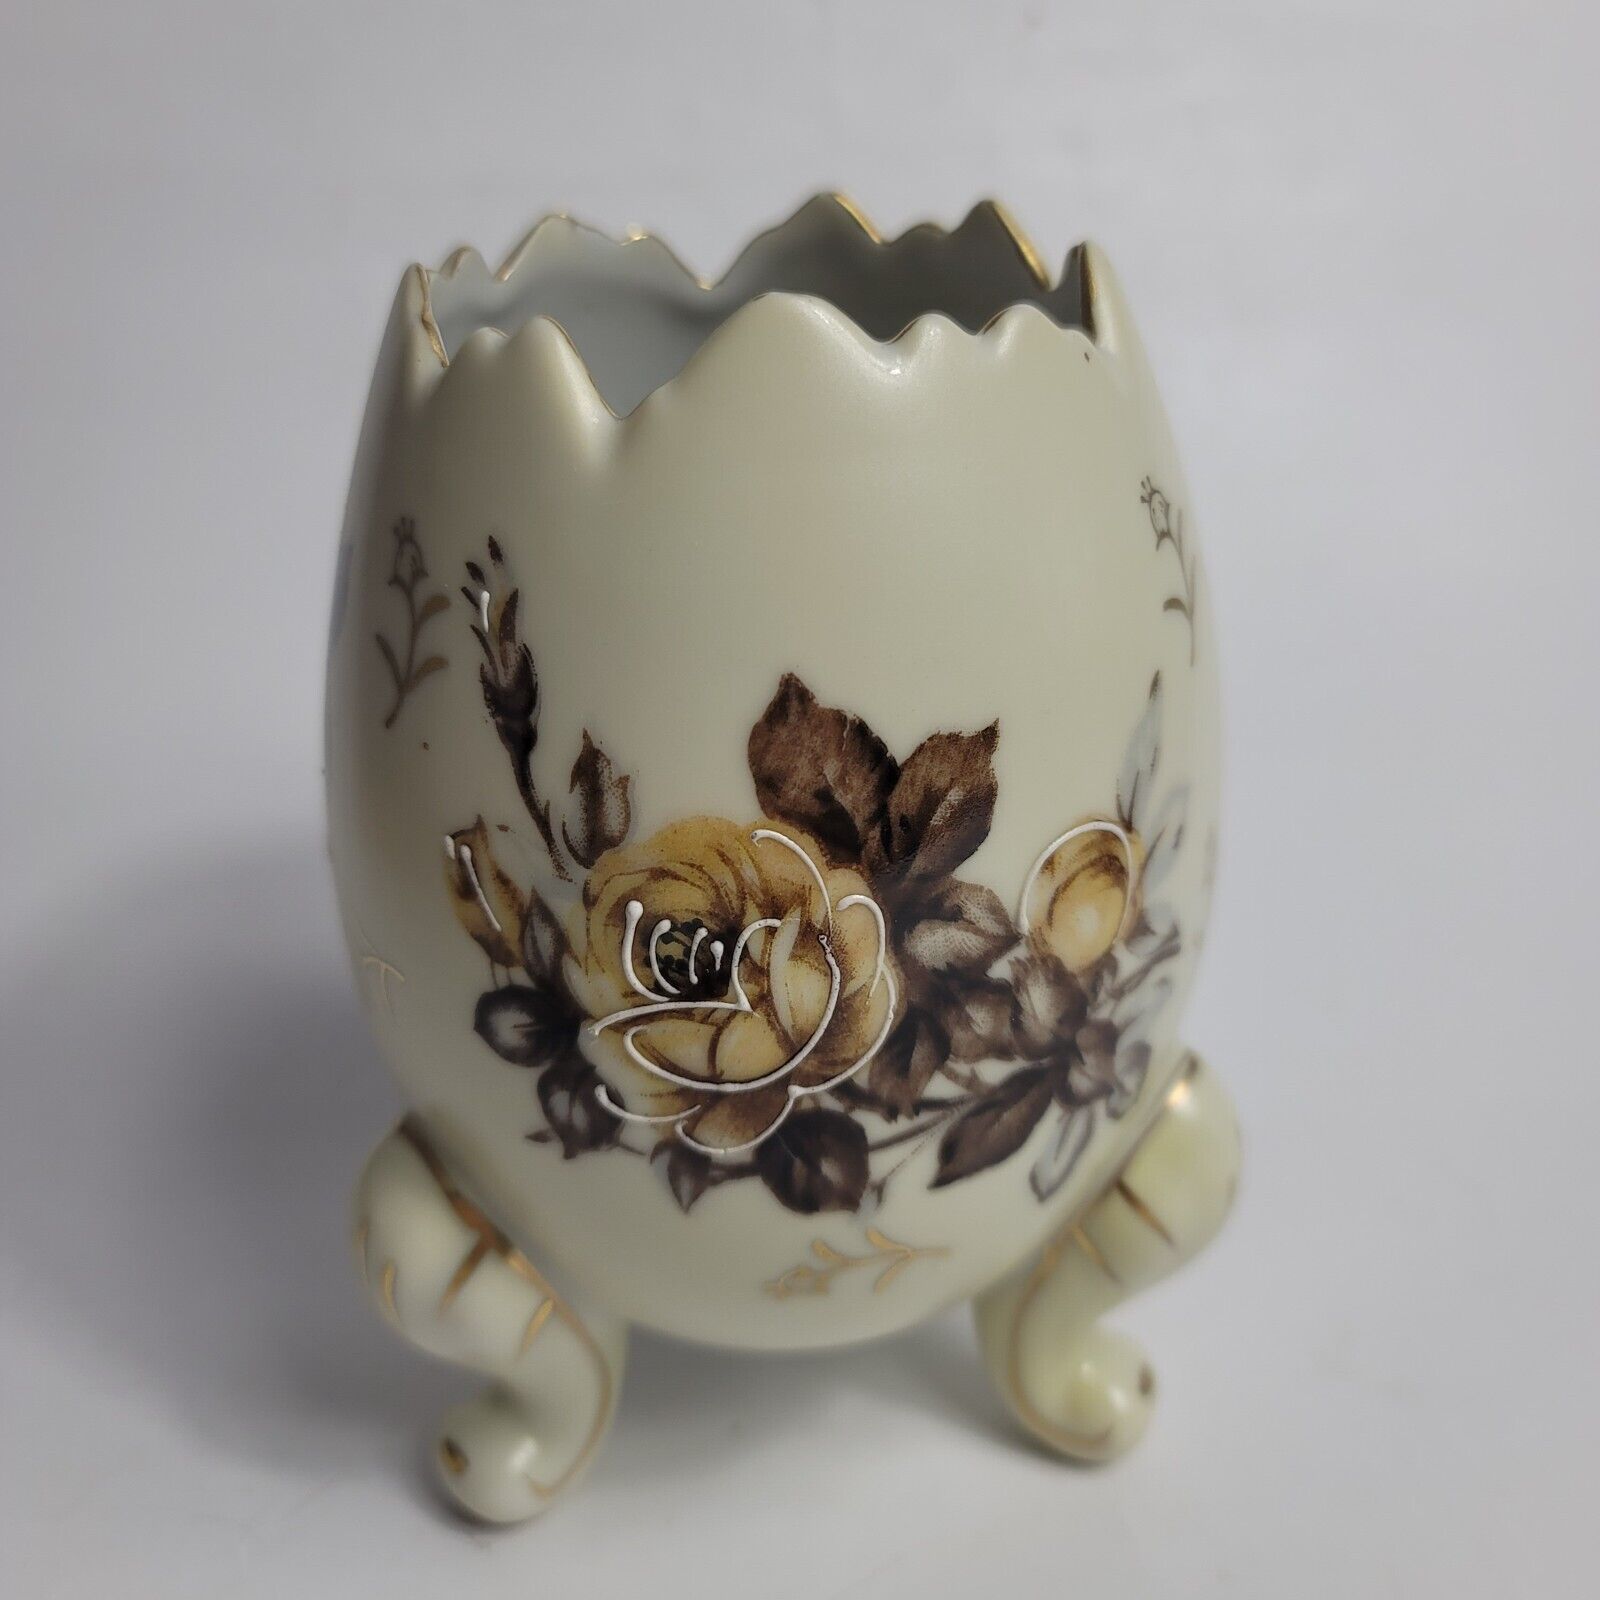 Napcoware 3 Footed Cracked Egg Vase Ivory with Brown Flowers